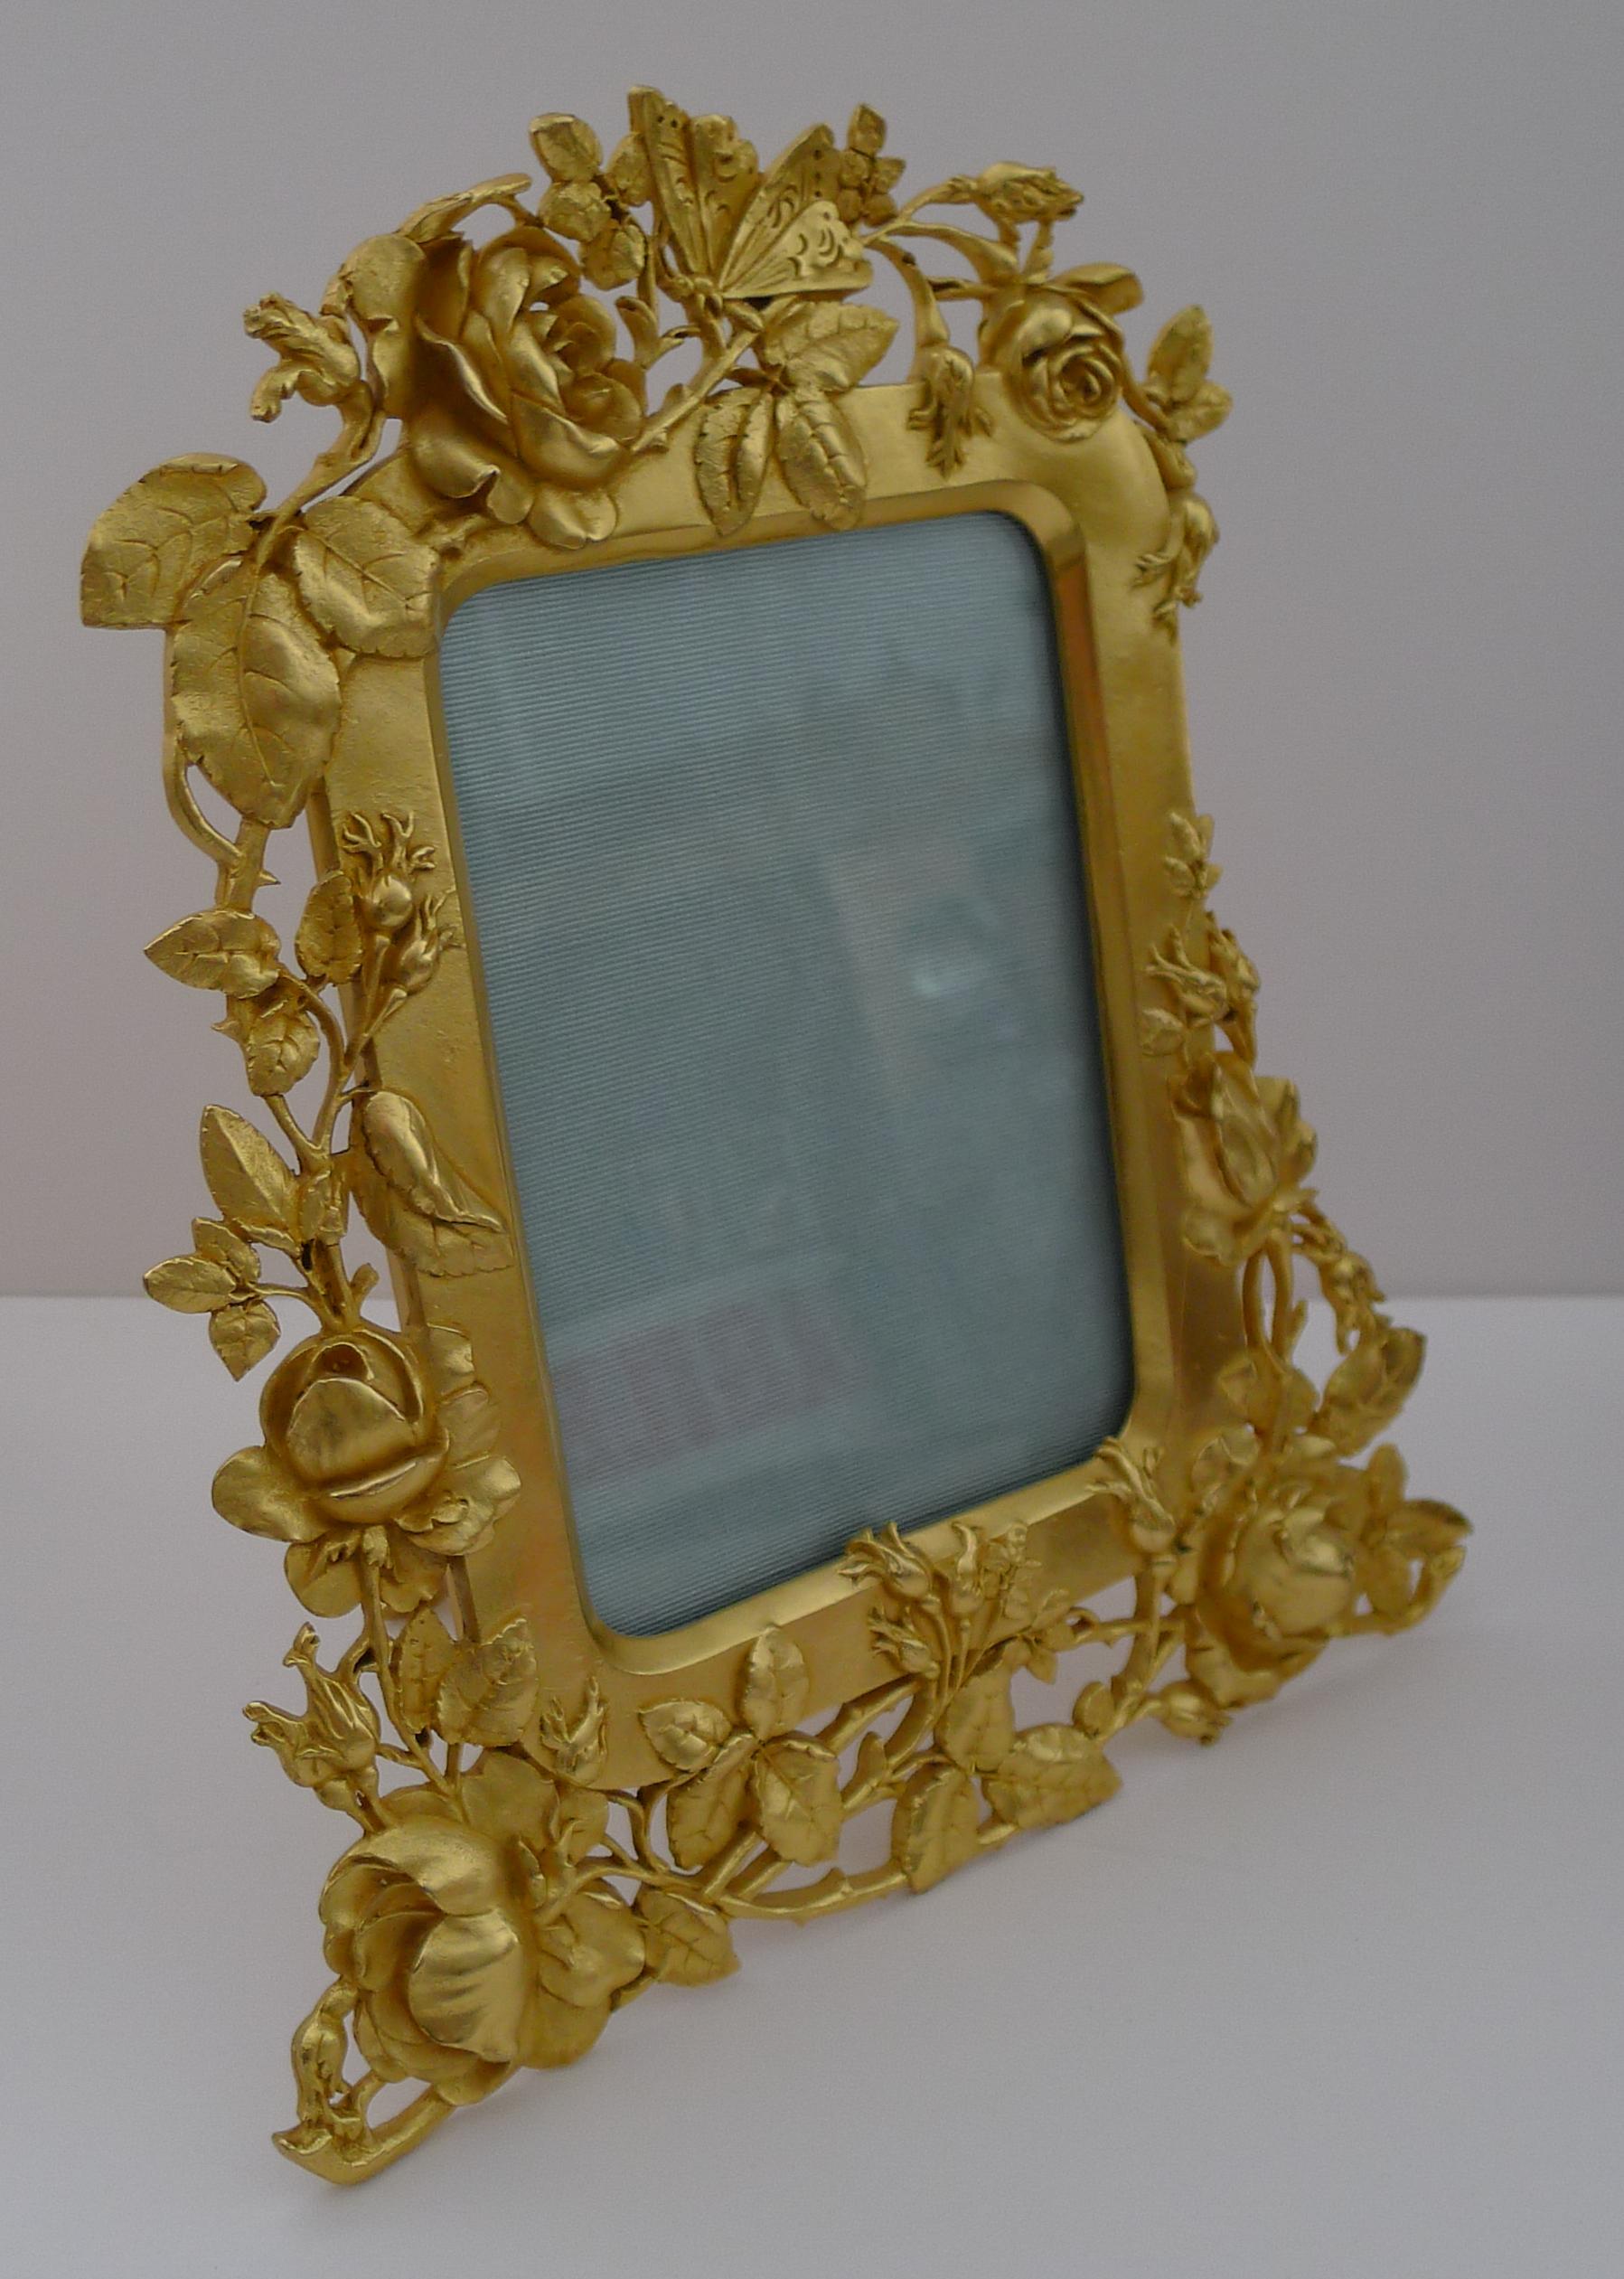 Heirloom Quality French Gilded Bronze Picture Frame c.1900 For Sale 5